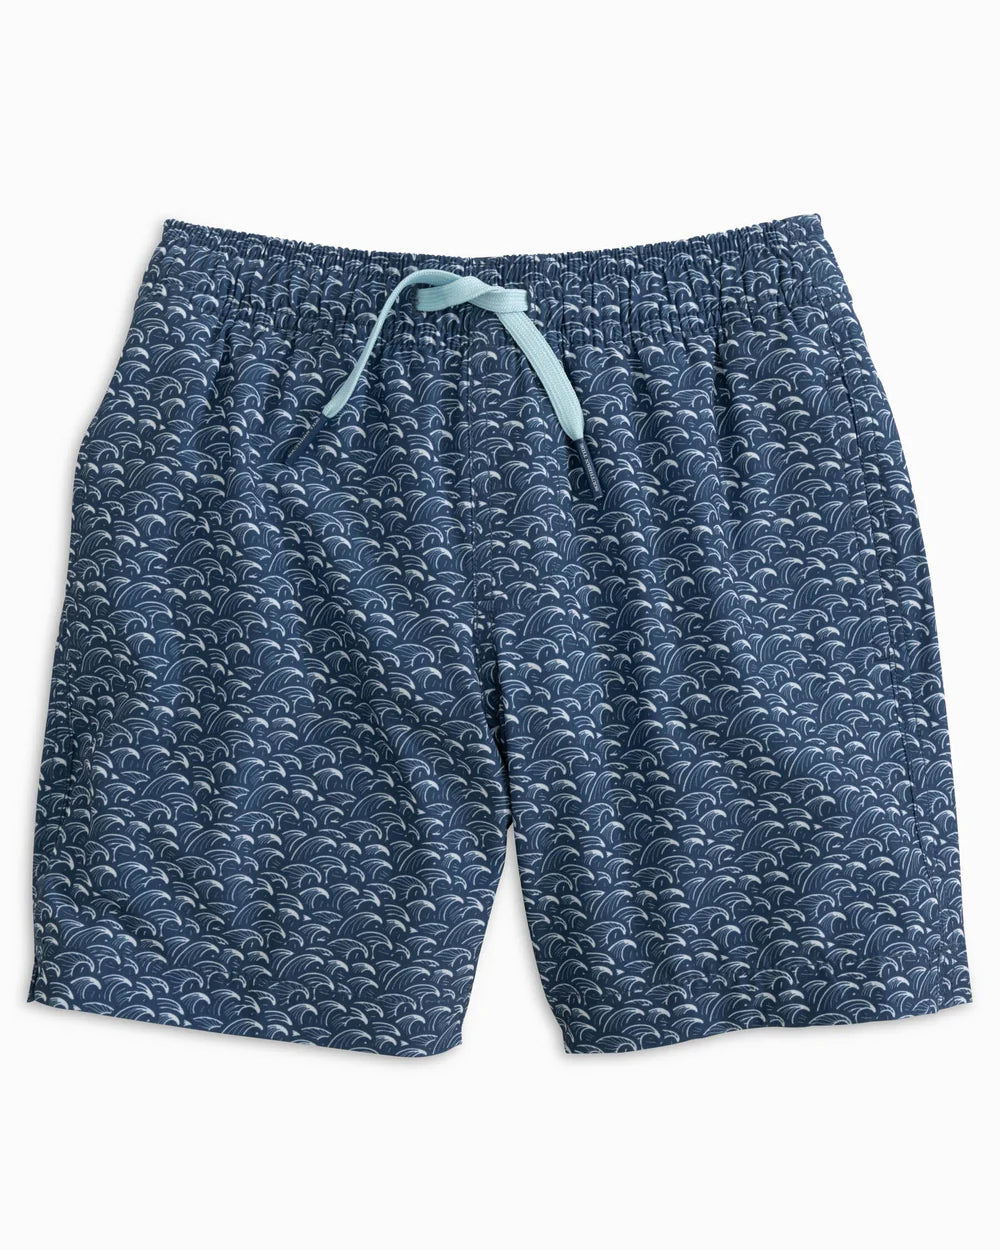 Southern Tide Youth Araby Cove Swim Trunk